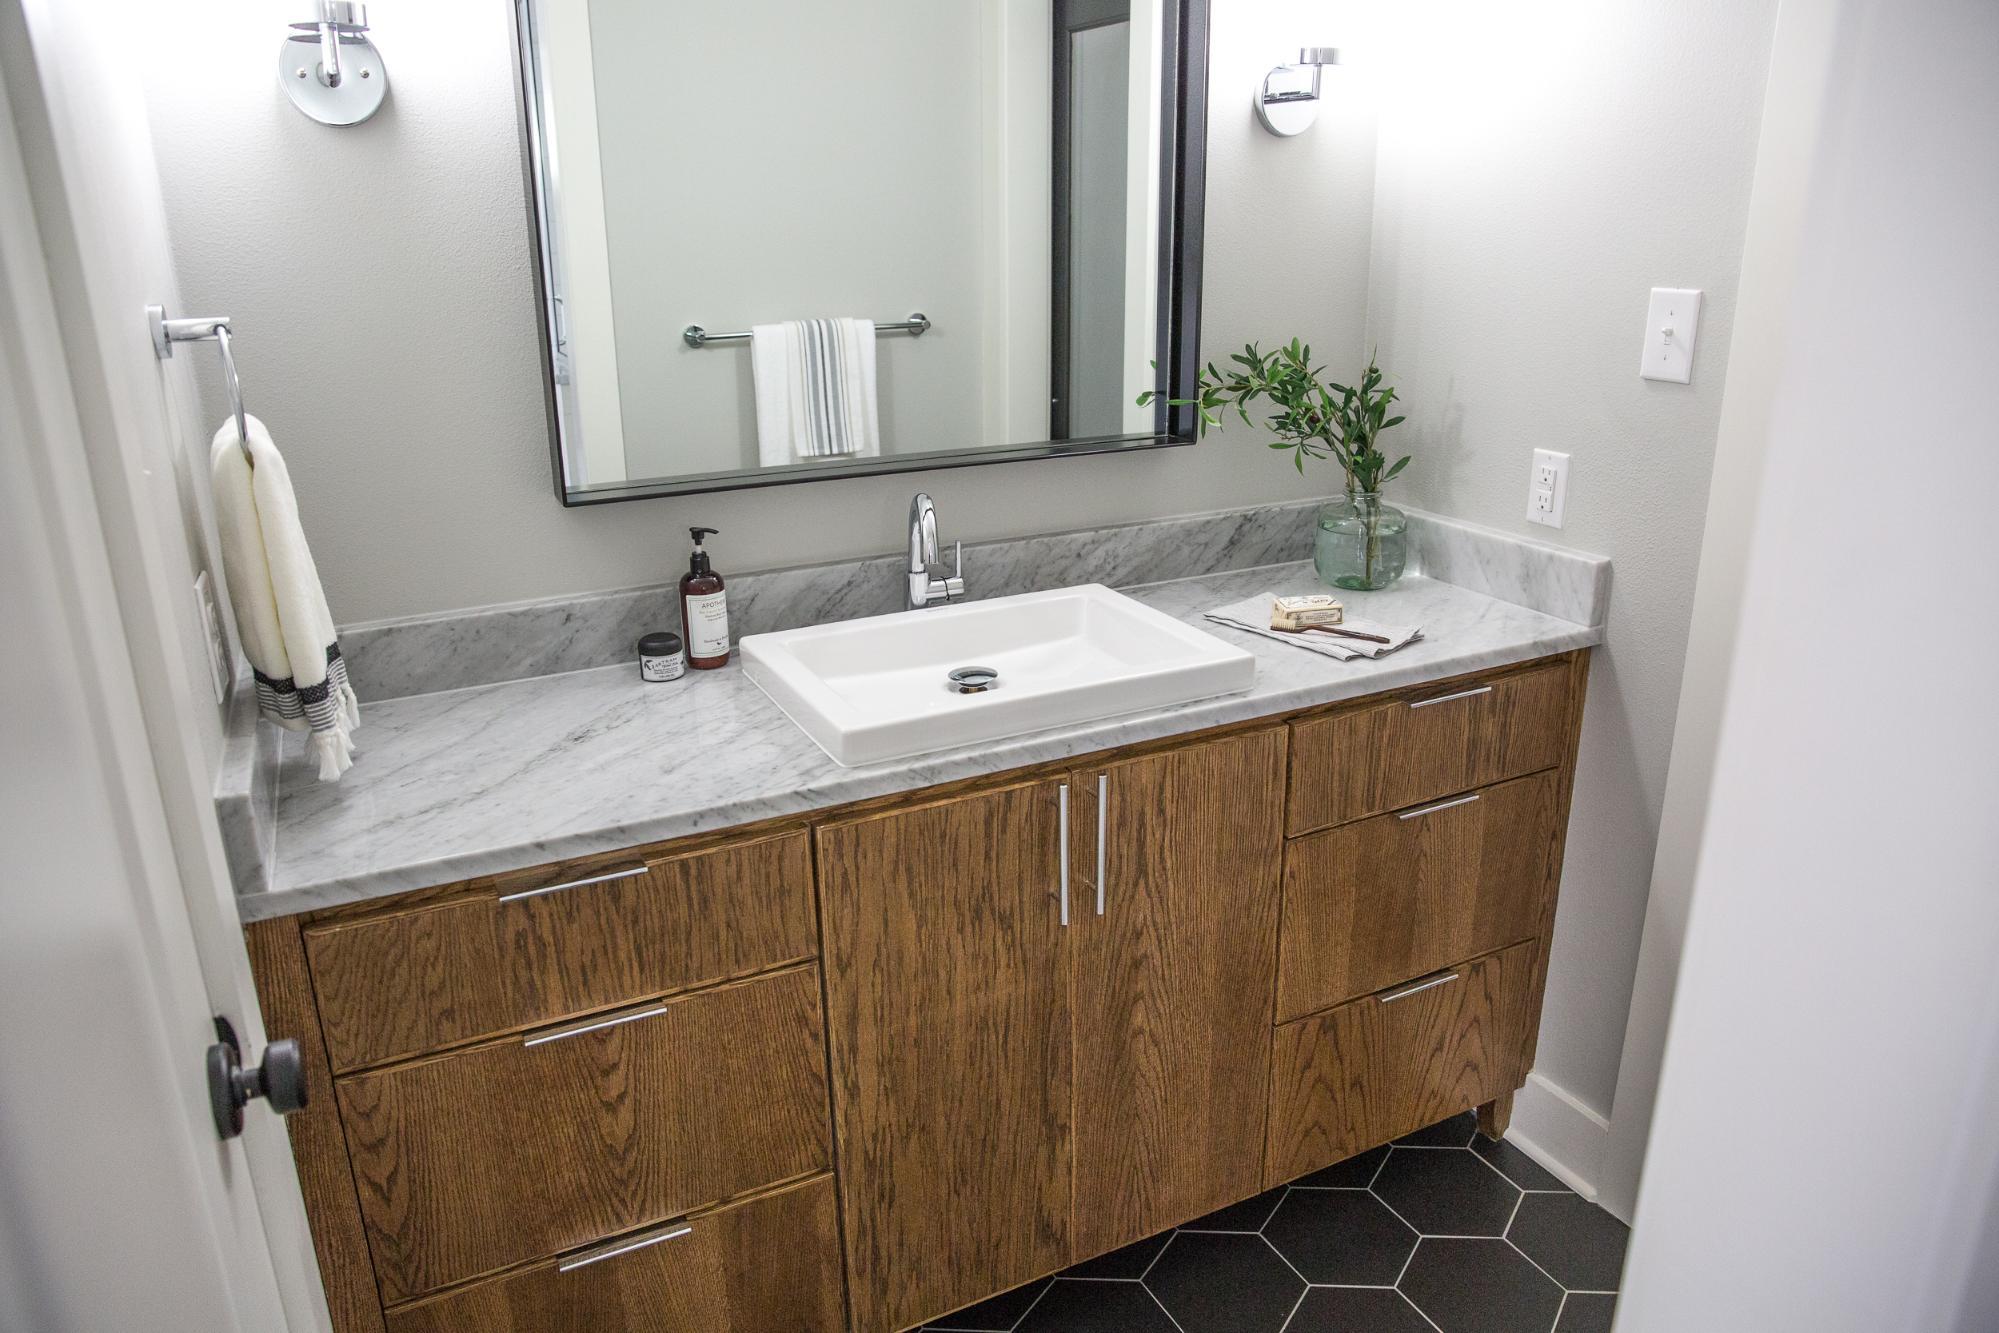 Joanna Gaines Has These Brilliant Tips For Creating The Perfect Master Bathroom